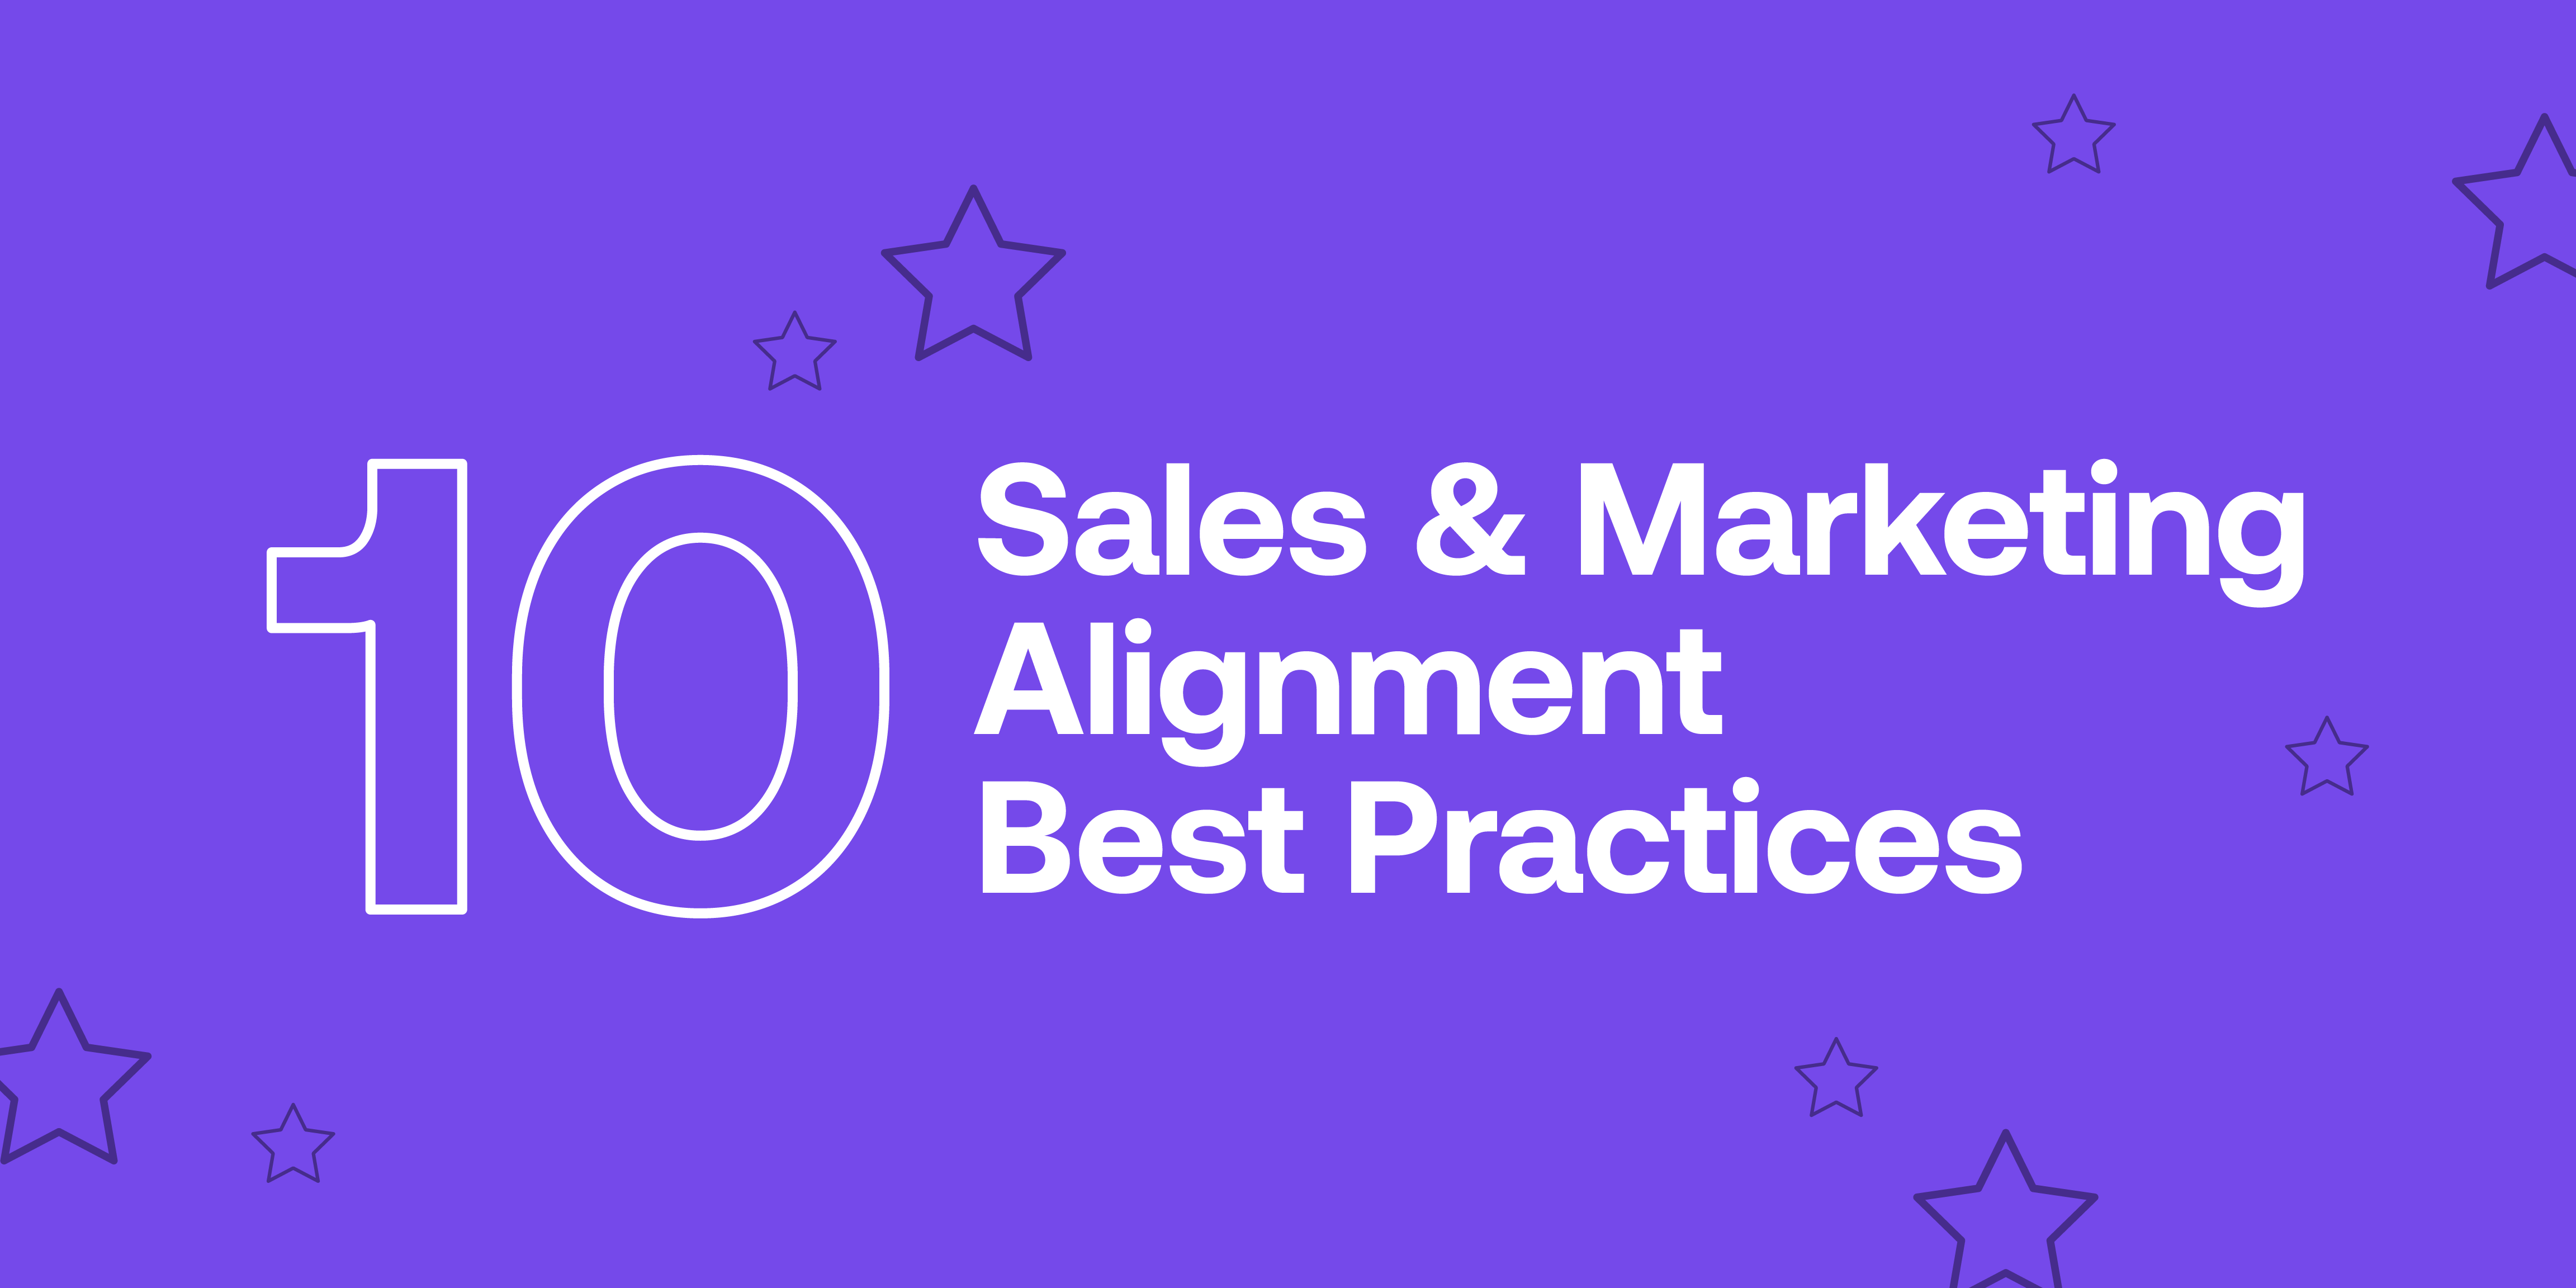 Sales Process Best Practices for Sales and Marketing Alignment